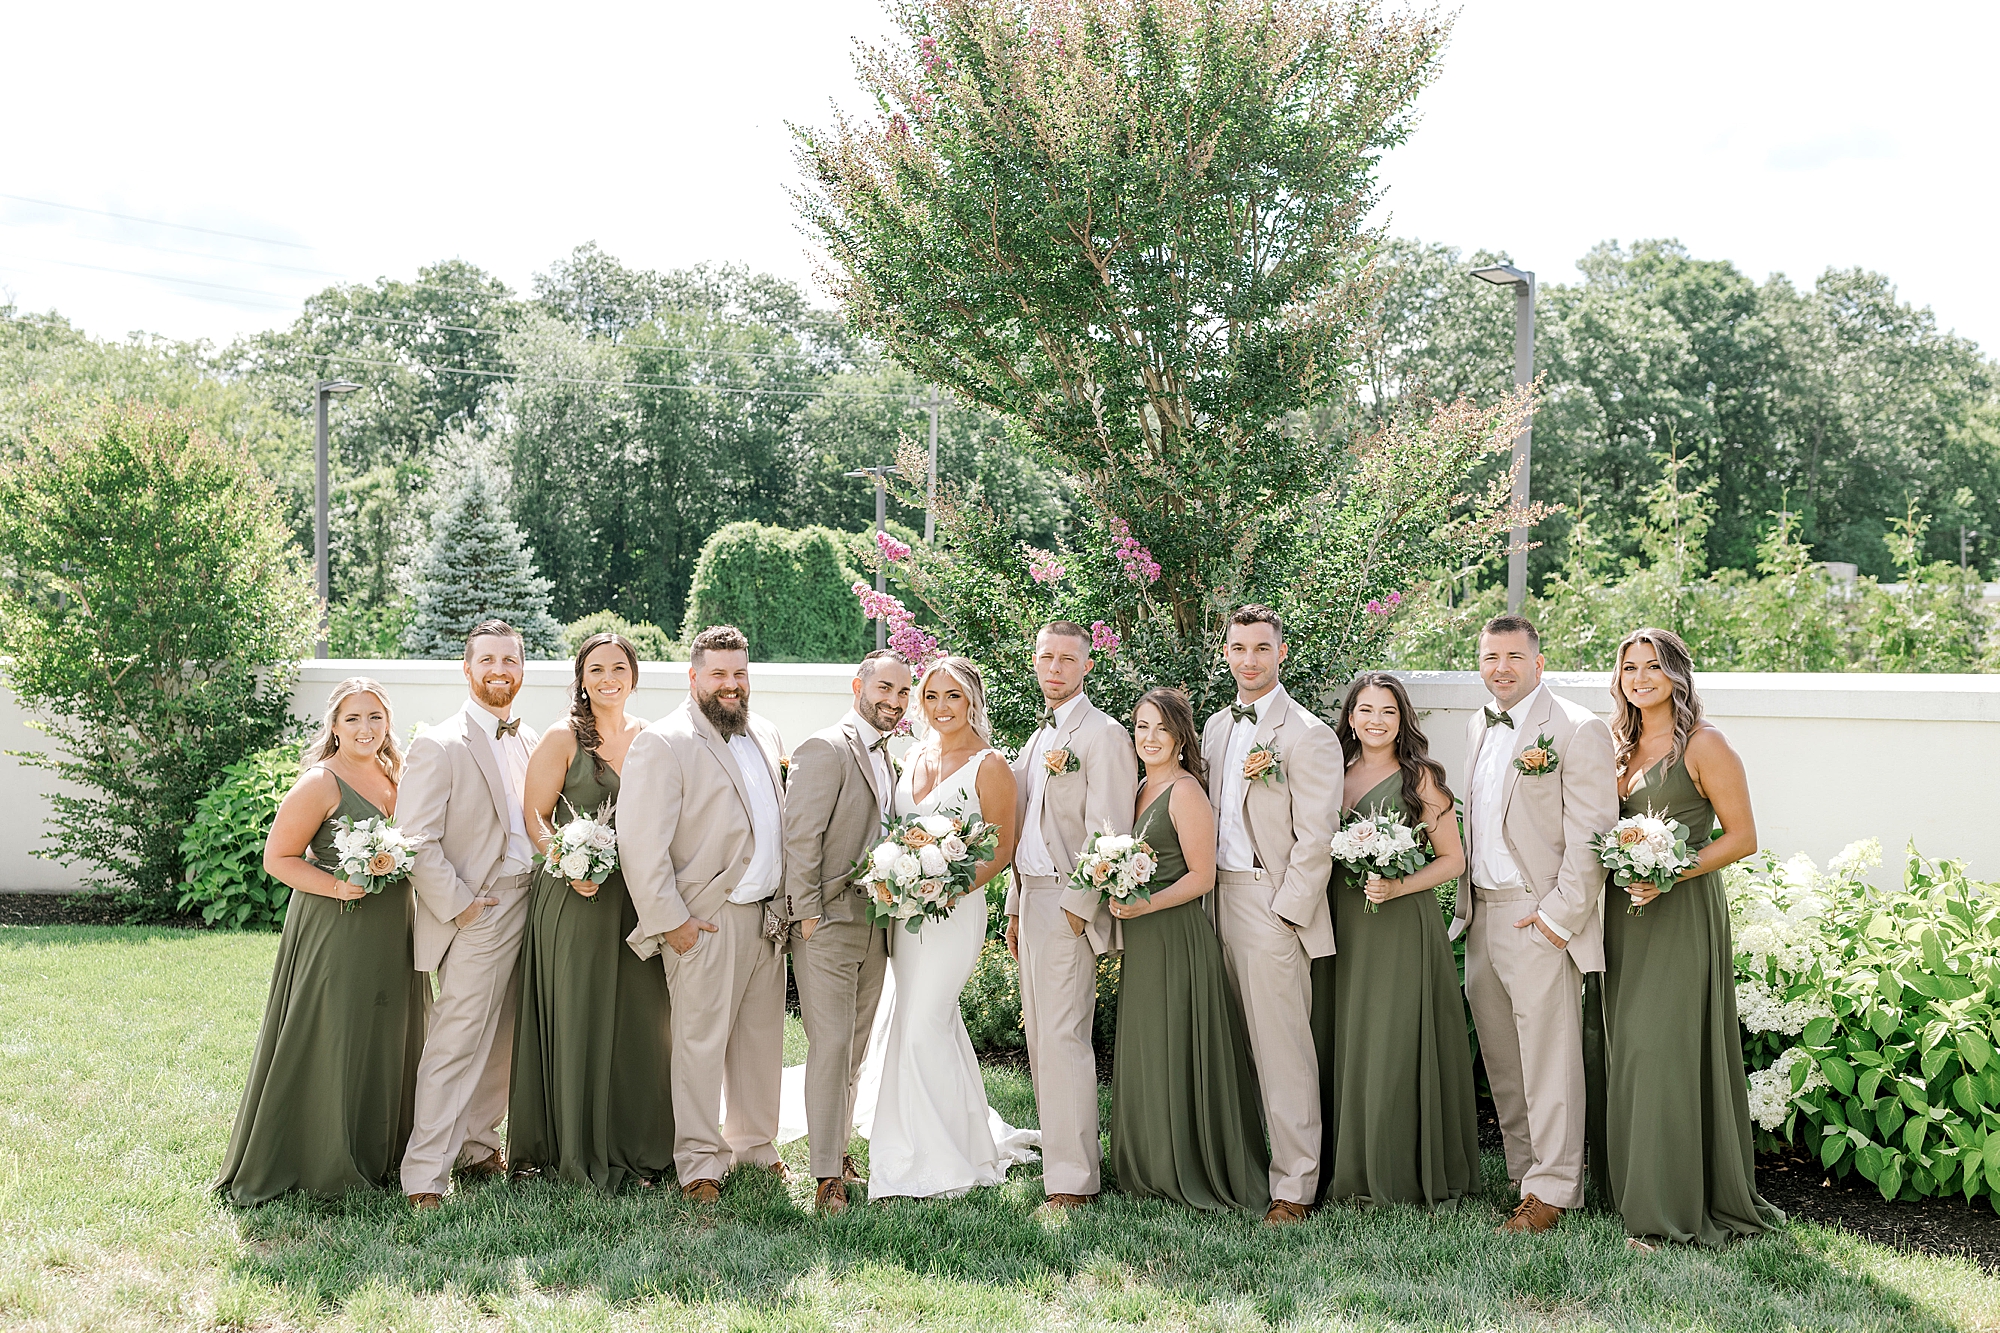 bride and groom pose with wedding party in tan and green outfits